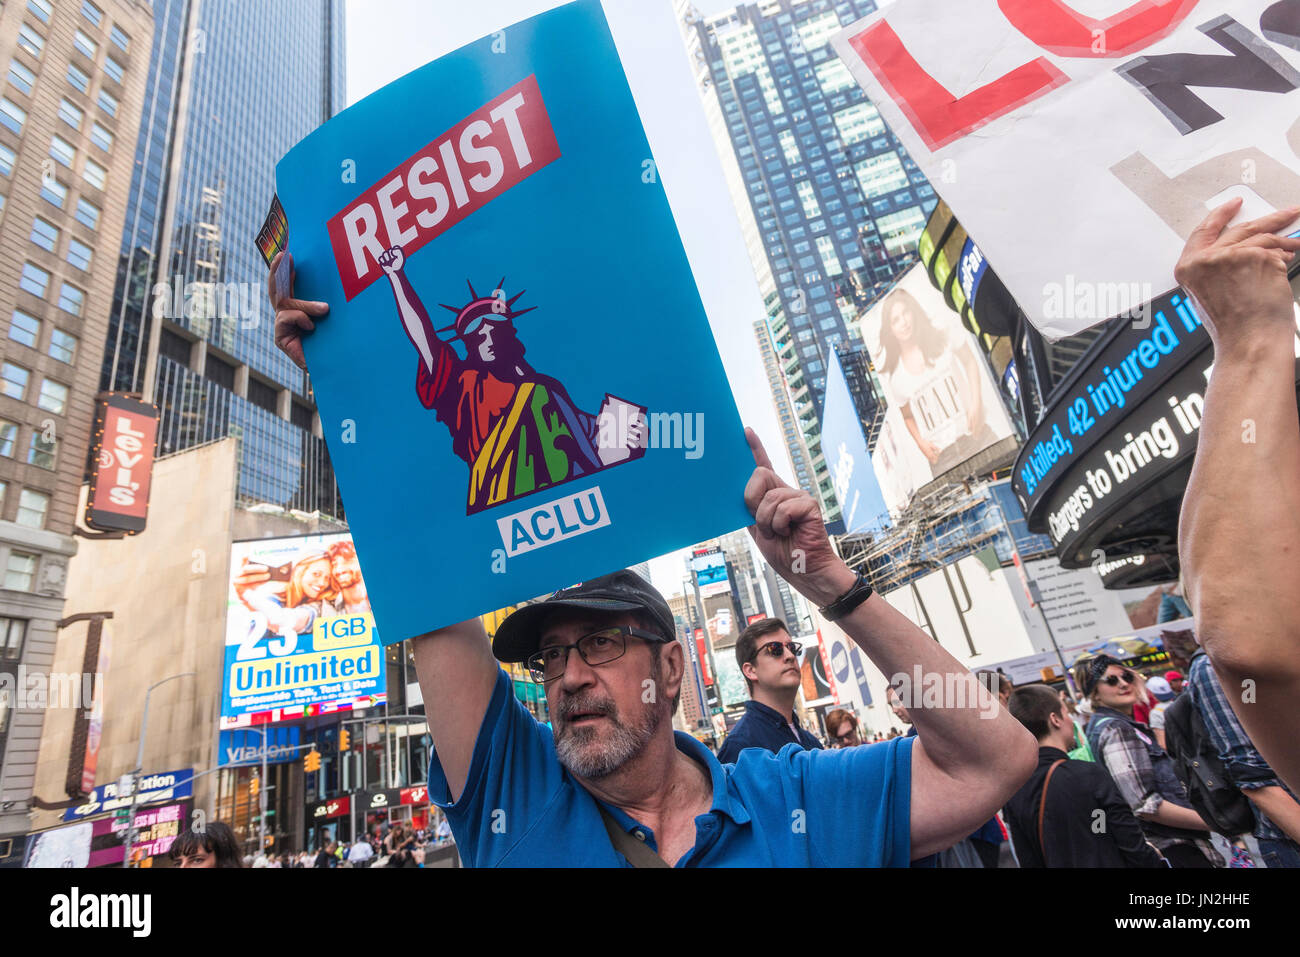 New York, NY 26 July 2017 In response to President Trump's tweet to ban transgender people from the military advocates, activists, and allies converged on the Military Recruitment Center in Times Square in protest. ©Stacy Walsh Rosenstock/Alamy Live News Stock Photo